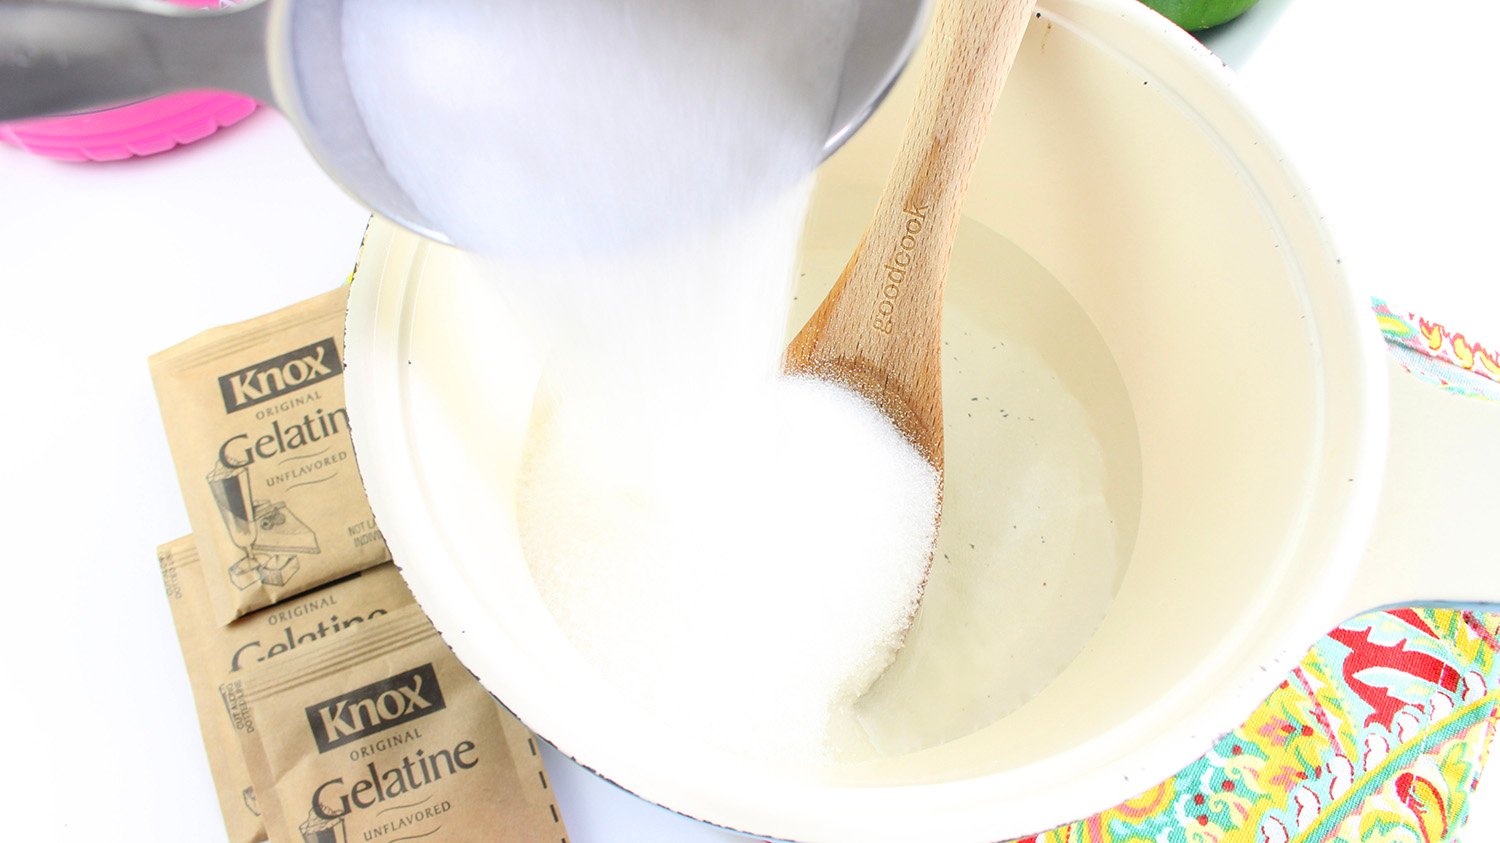 pouring ingredients into mixing bowl